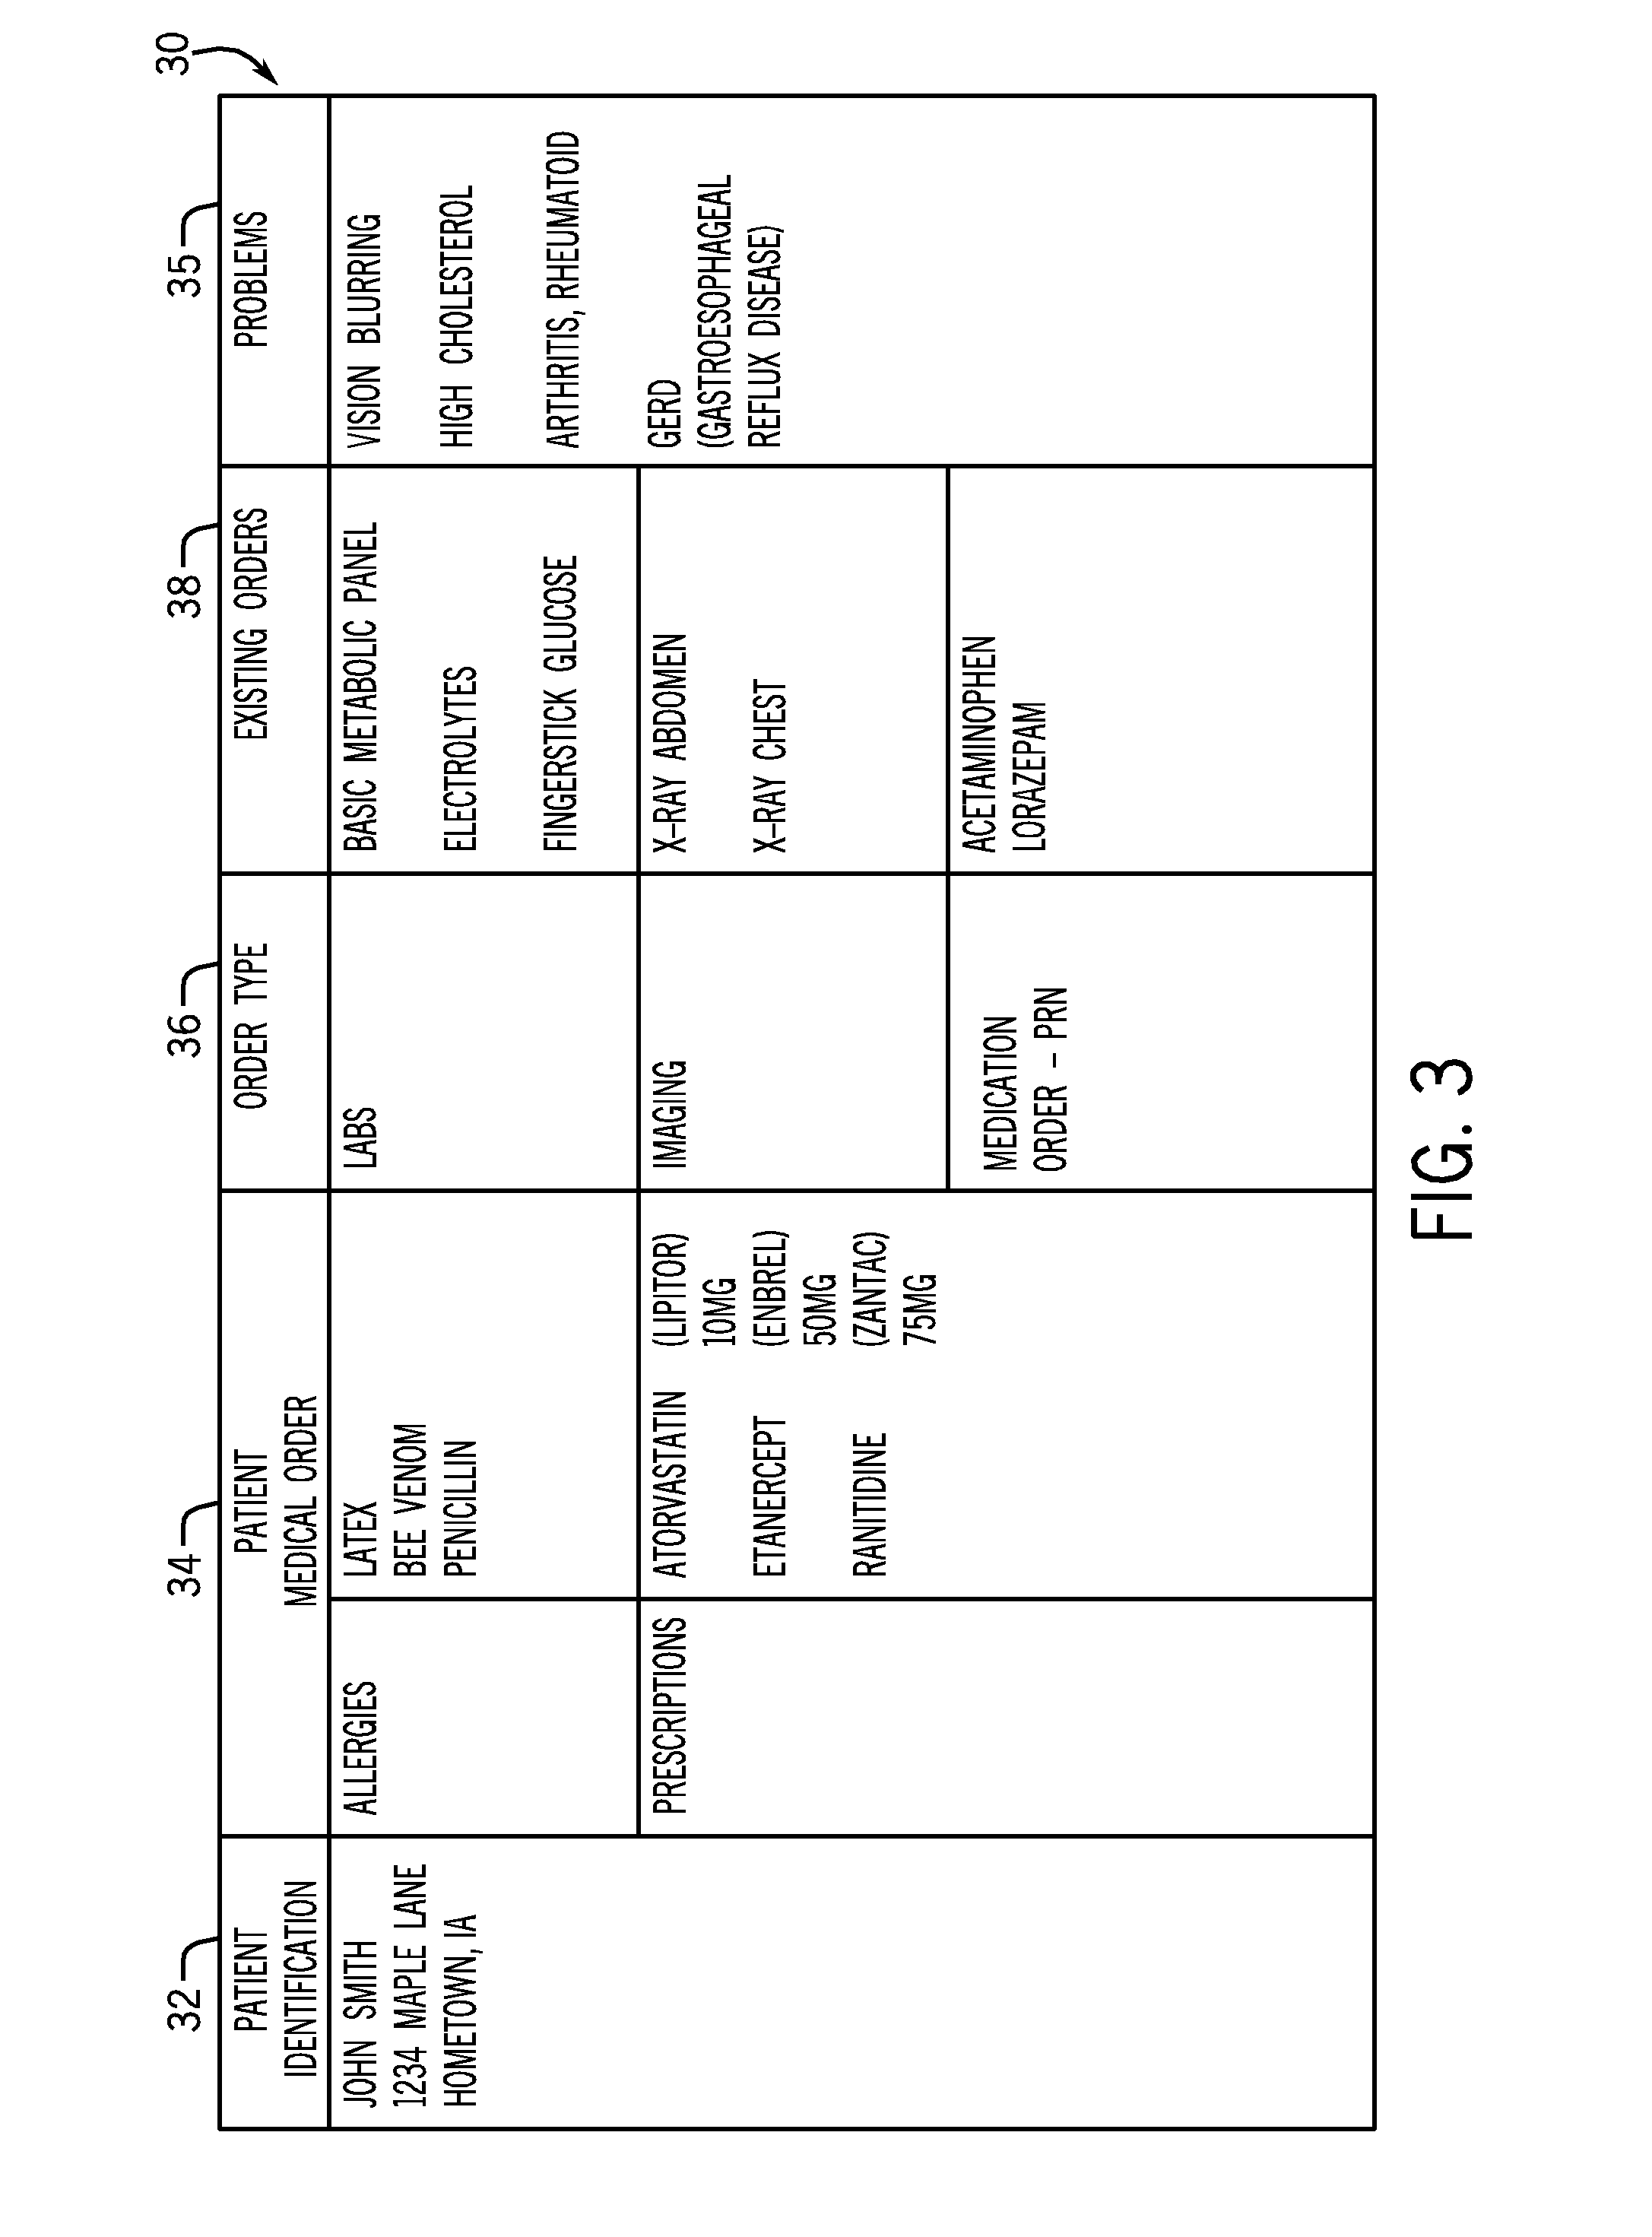 Method for Minimizing Entry of Medically Similar Orders in a Computerized Medical Records System